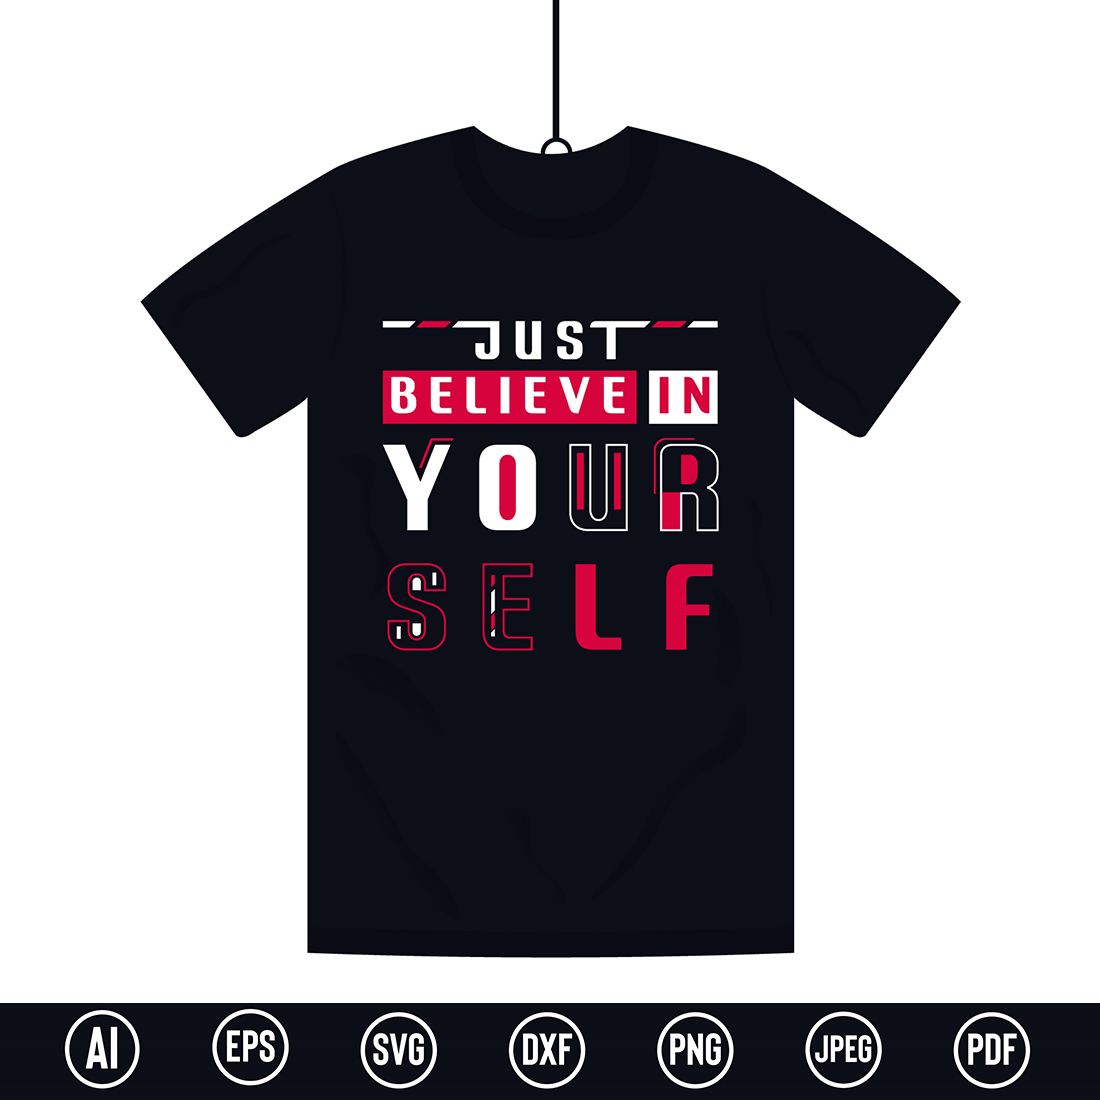 Motivational & Modern Typography T-Shirt design with “Just Believe in your self” quote for t-shirt, posters, stickers, mug prints, banners, gift cards, labels etc cover image.